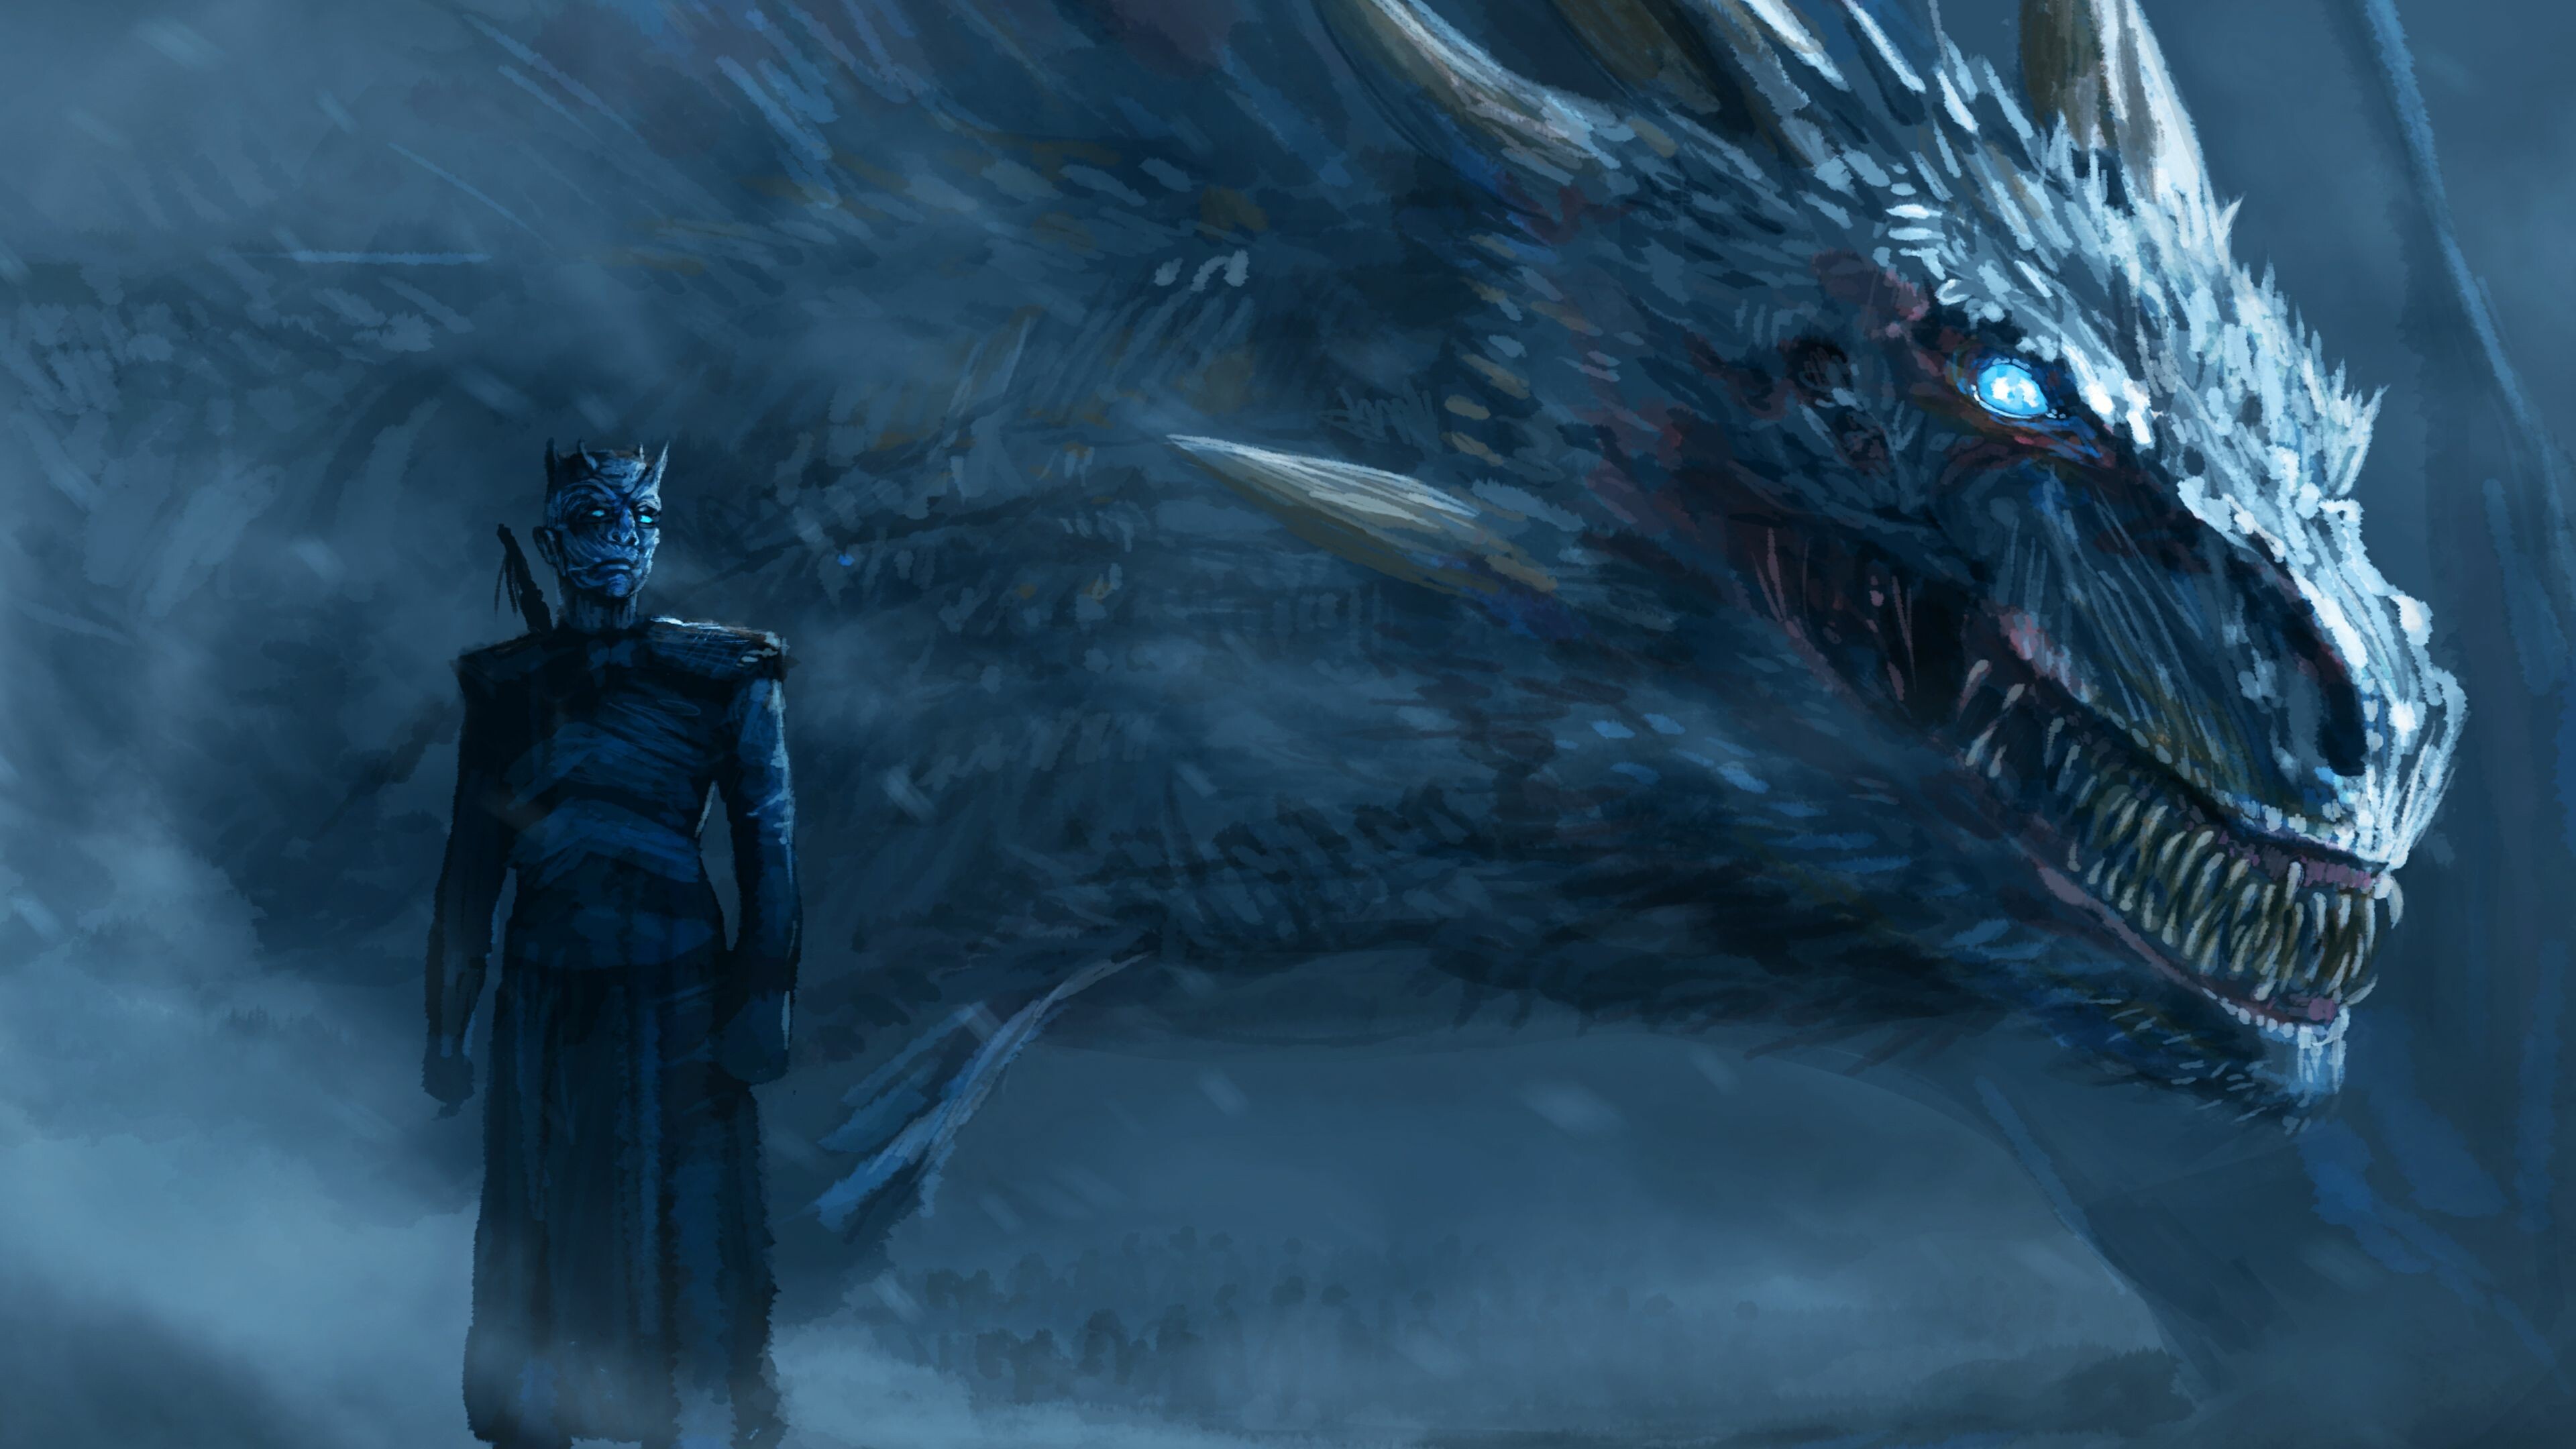 Game of Thrones: Night King, leader and first of the White Walkers, Viserion. 3840x2160 4K Wallpaper.